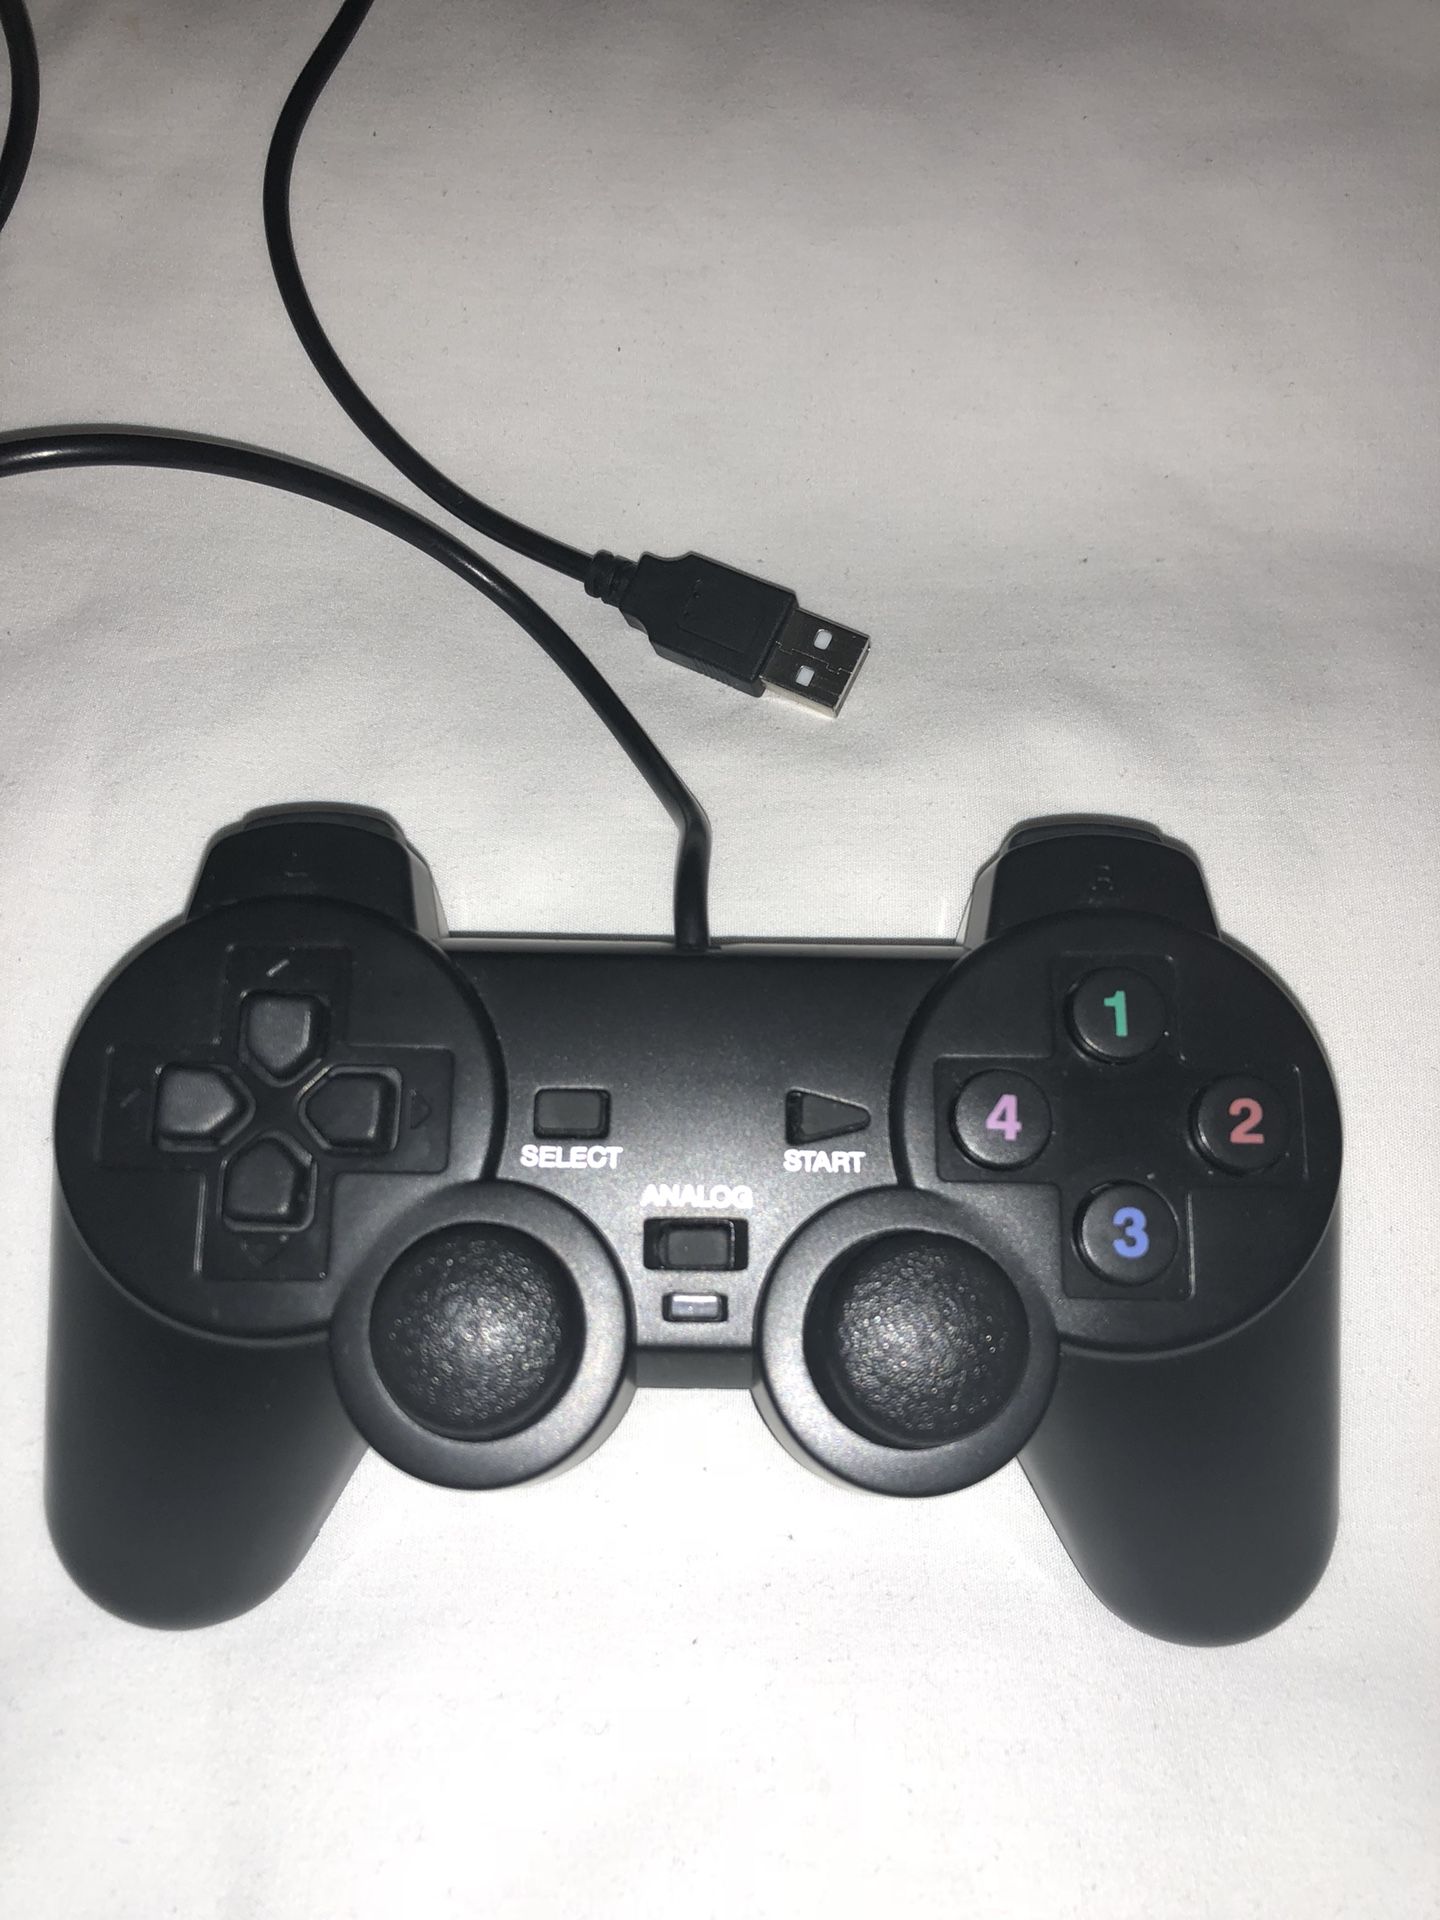 Game controller (Joystick) for PC